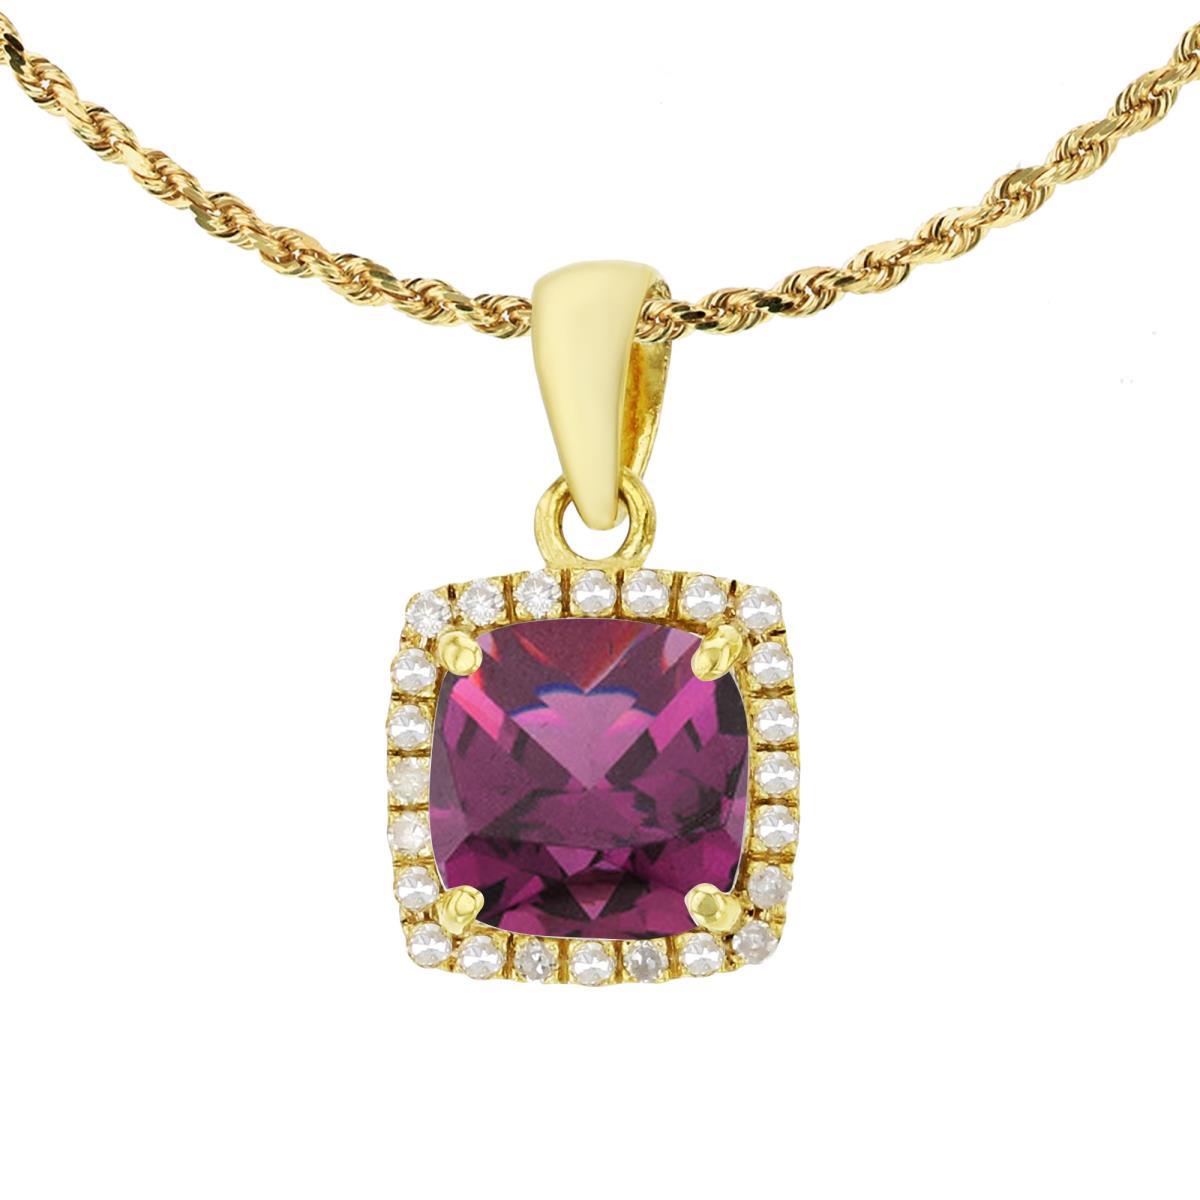 14K Yellow Gold 7mm Cushion Rhodolite & 0.12 CTTW Diamond Halo 18" Rope Chain Necklace